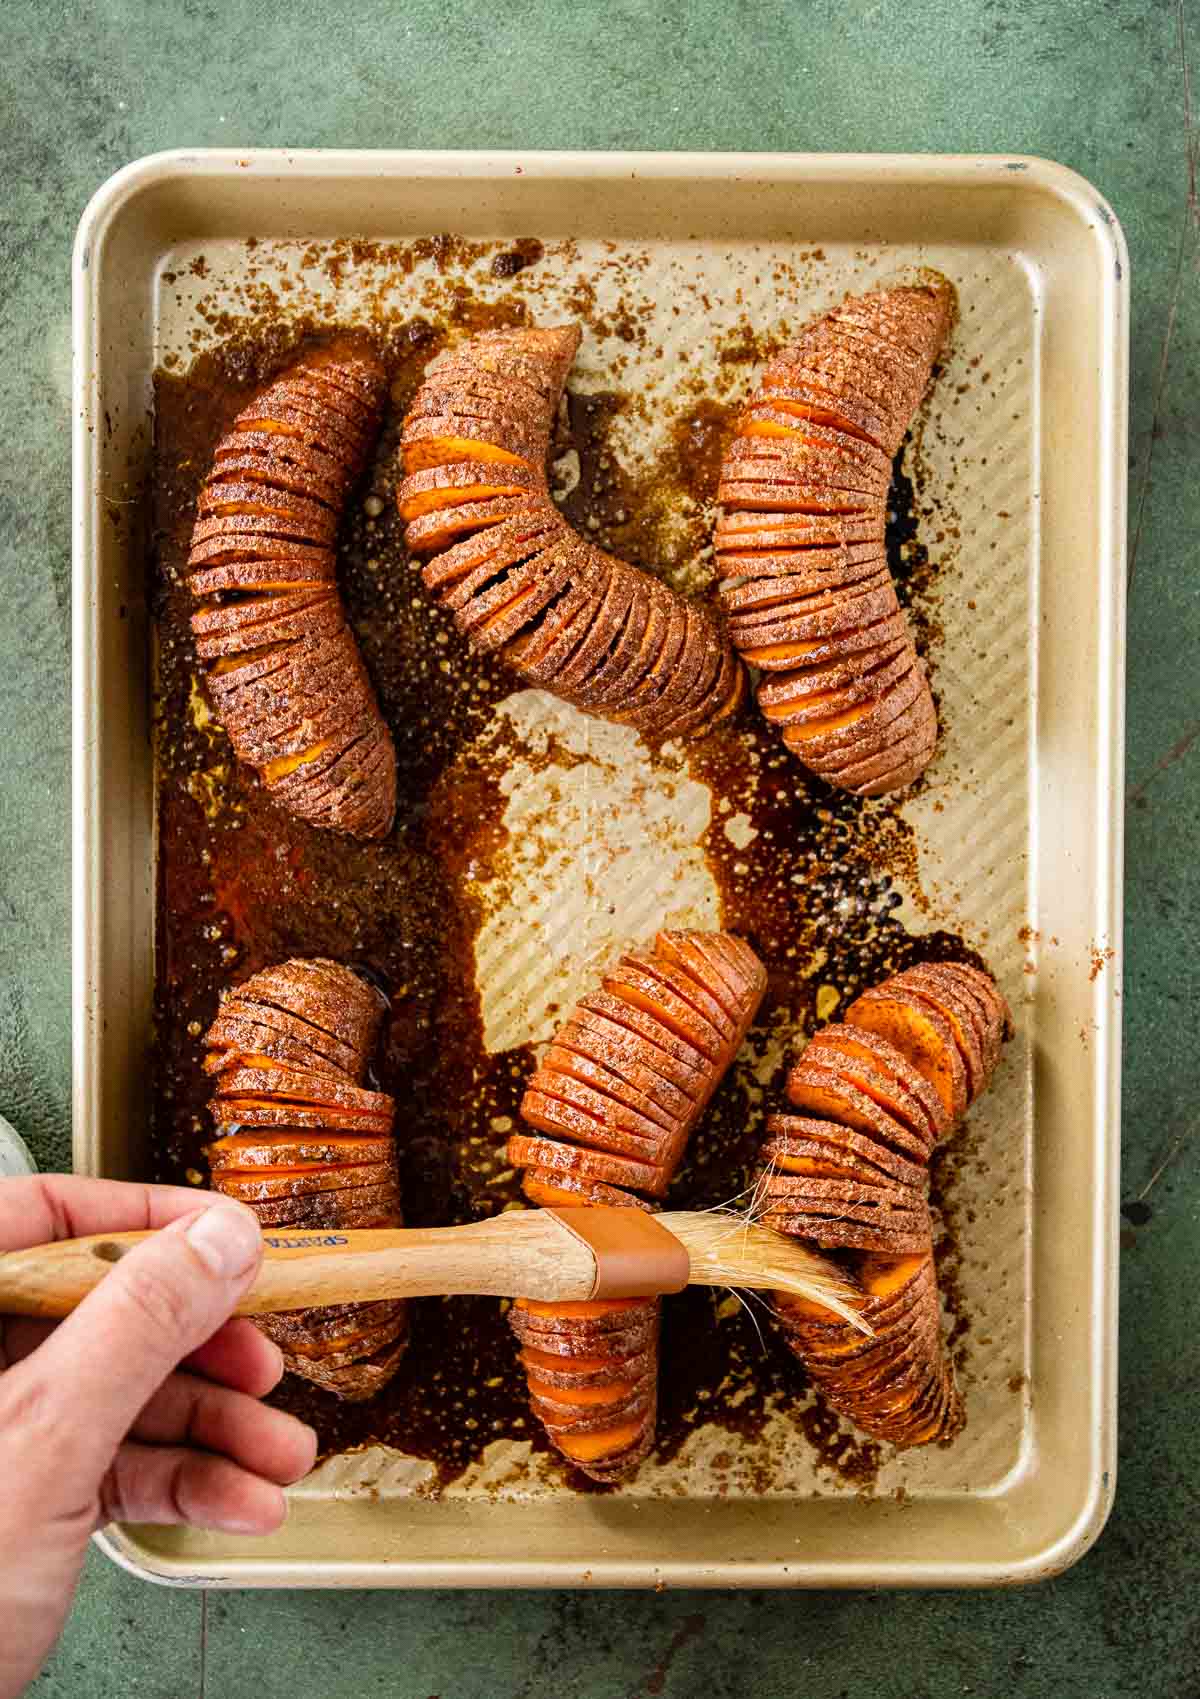 Candied Hasselback Sweet Potatoes second brushing with butter